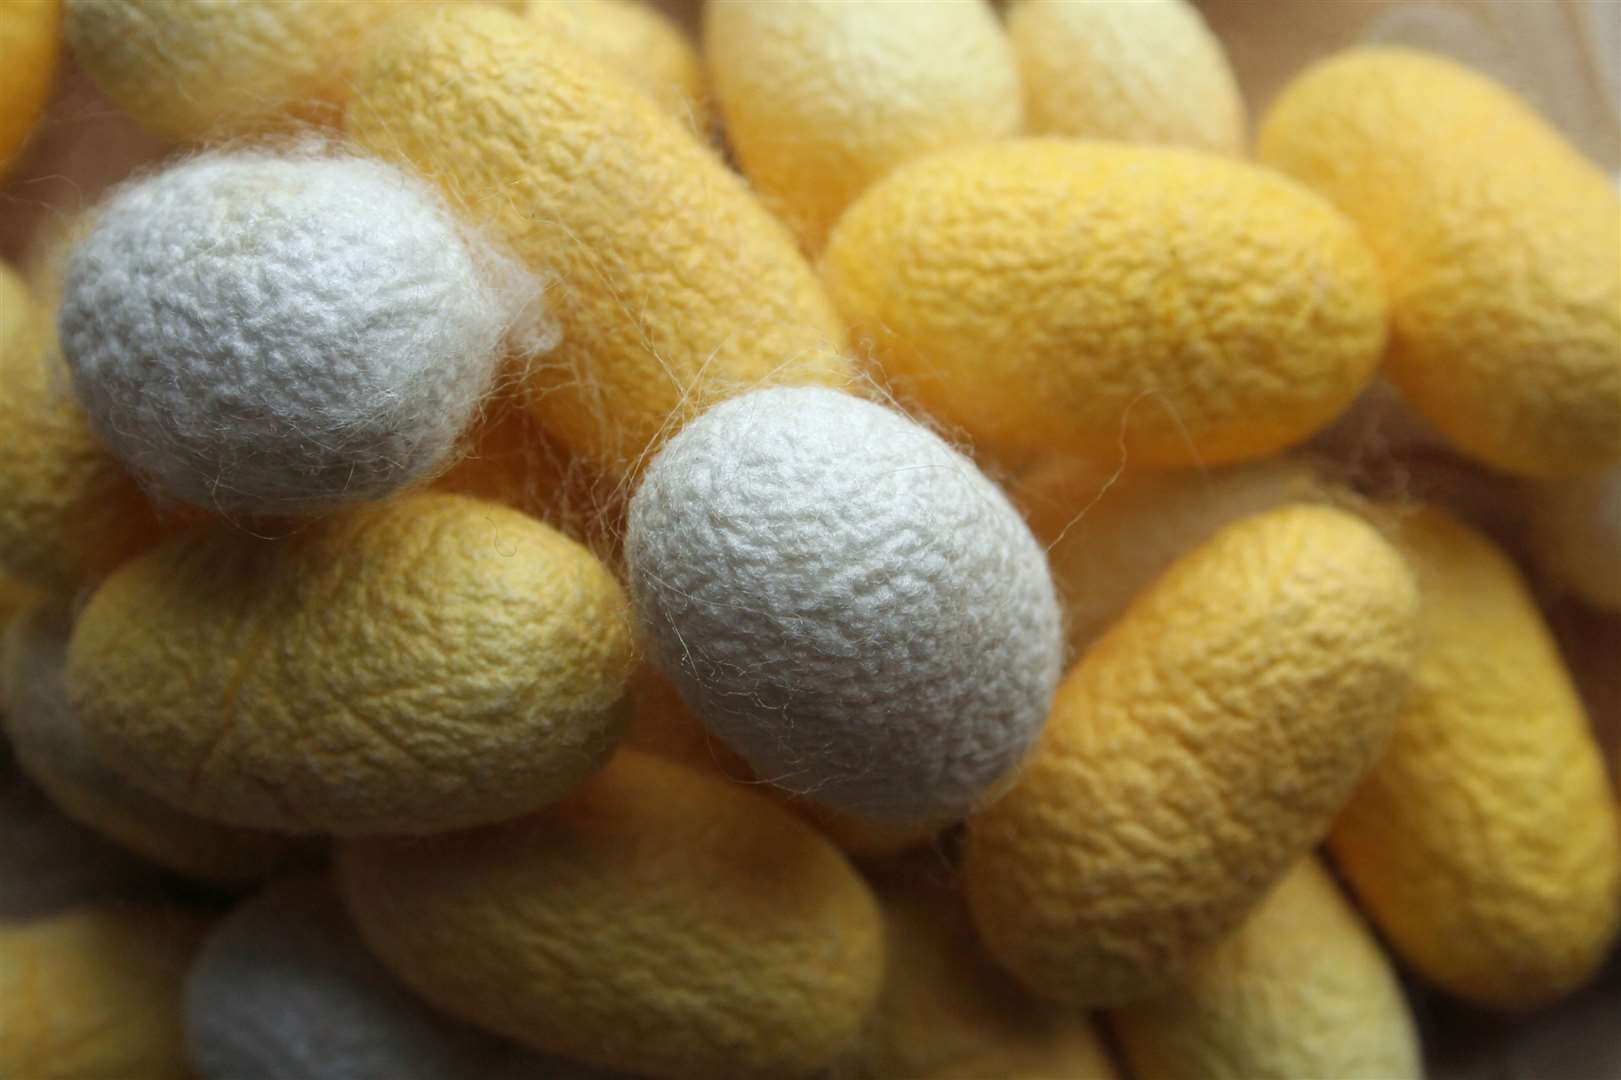 Silk cocoons - each one could make a quarter of a mile of silk